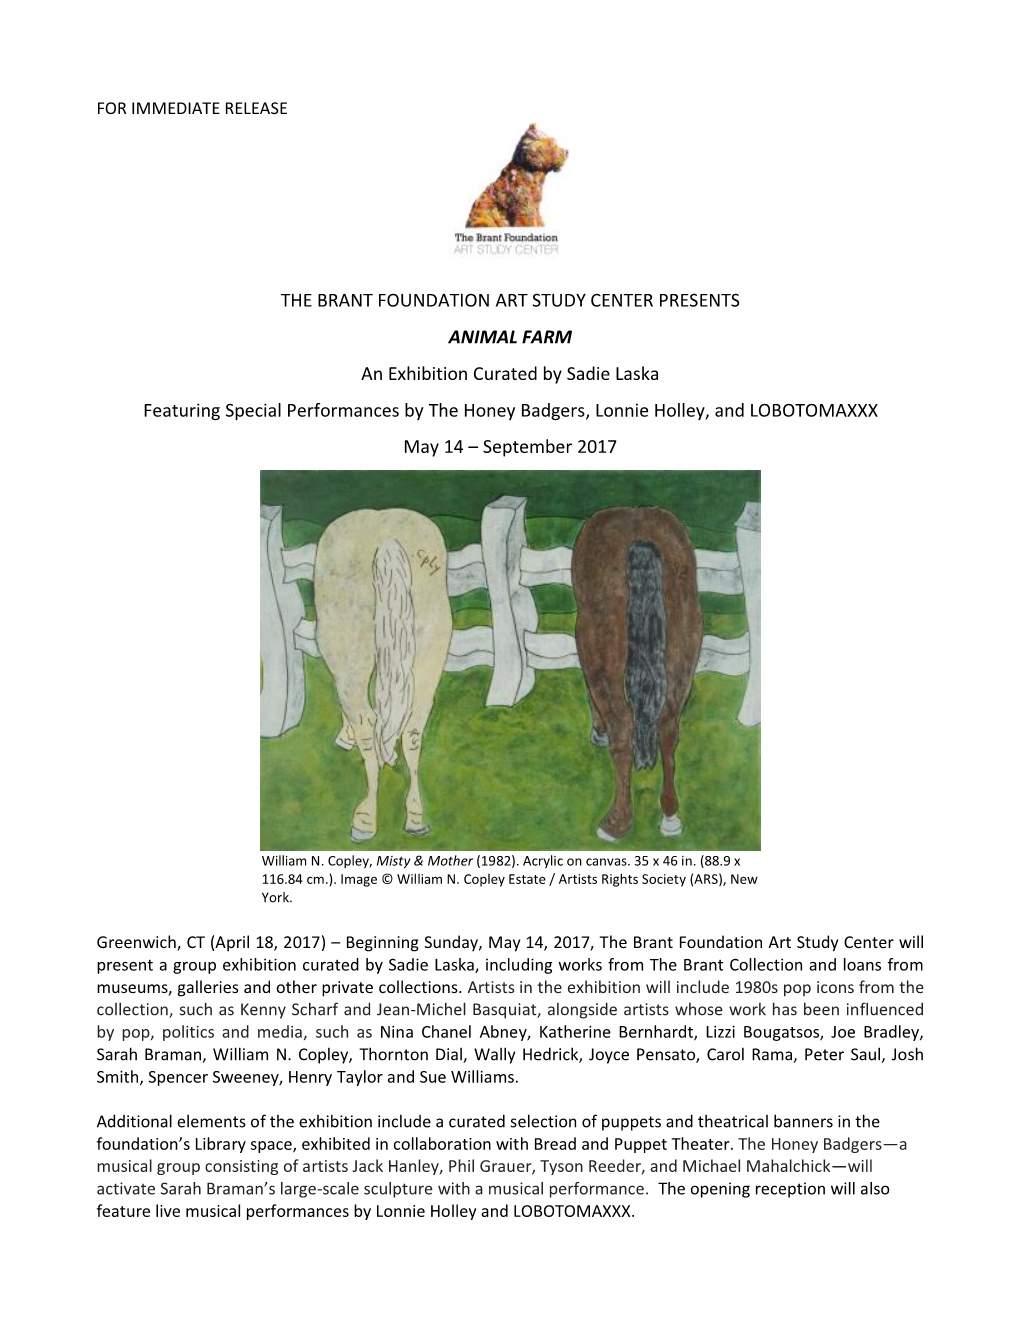 THE BRANT FOUNDATION ART STUDY CENTER PRESENTS ANIMAL FARM an Exhibition Curated by Sadie Laska Featuring Special Performances B